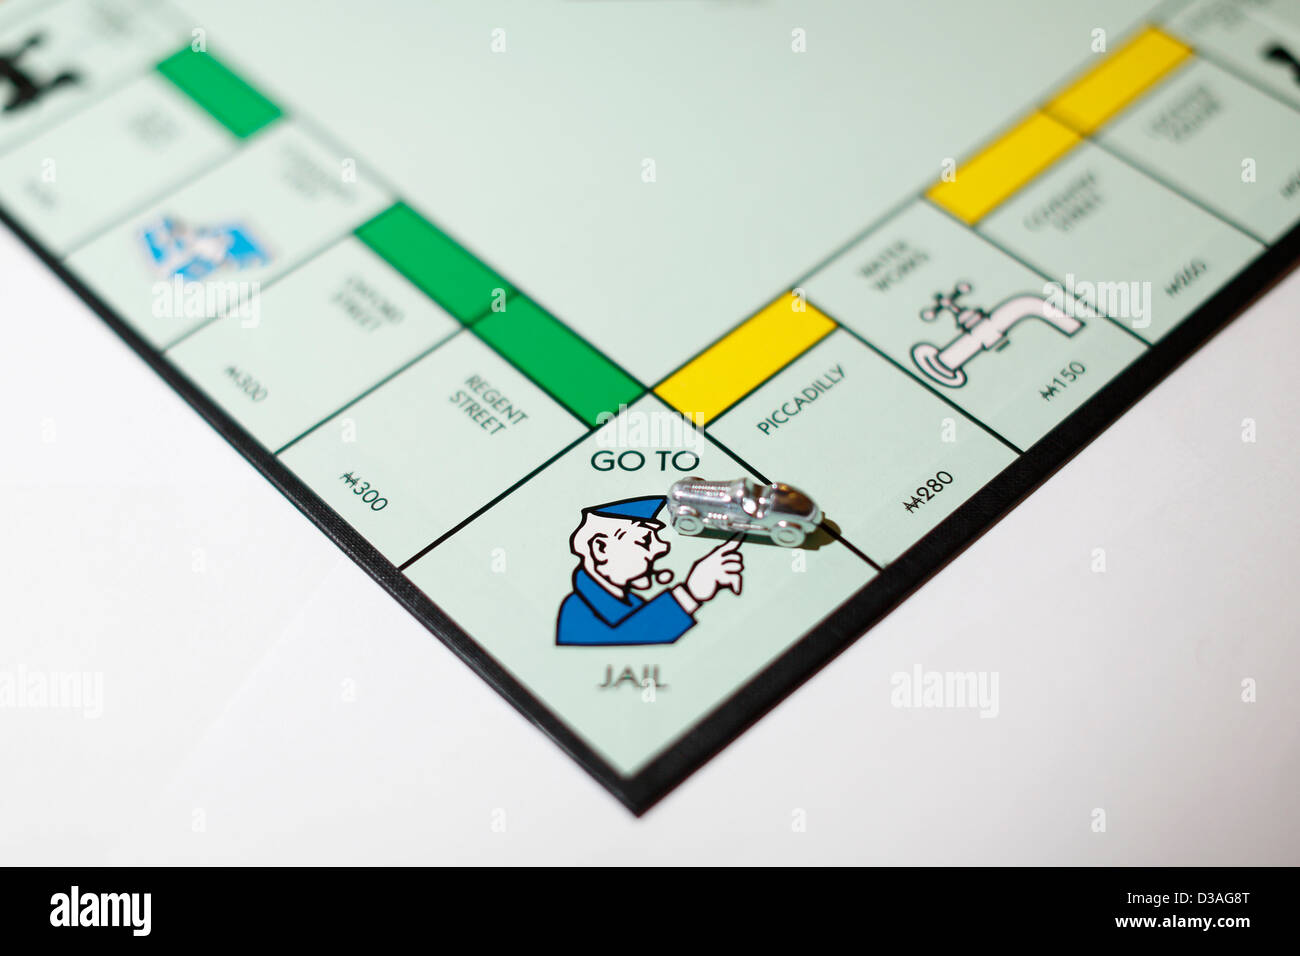 Go to jail on Monopoly board game. Stock Photo